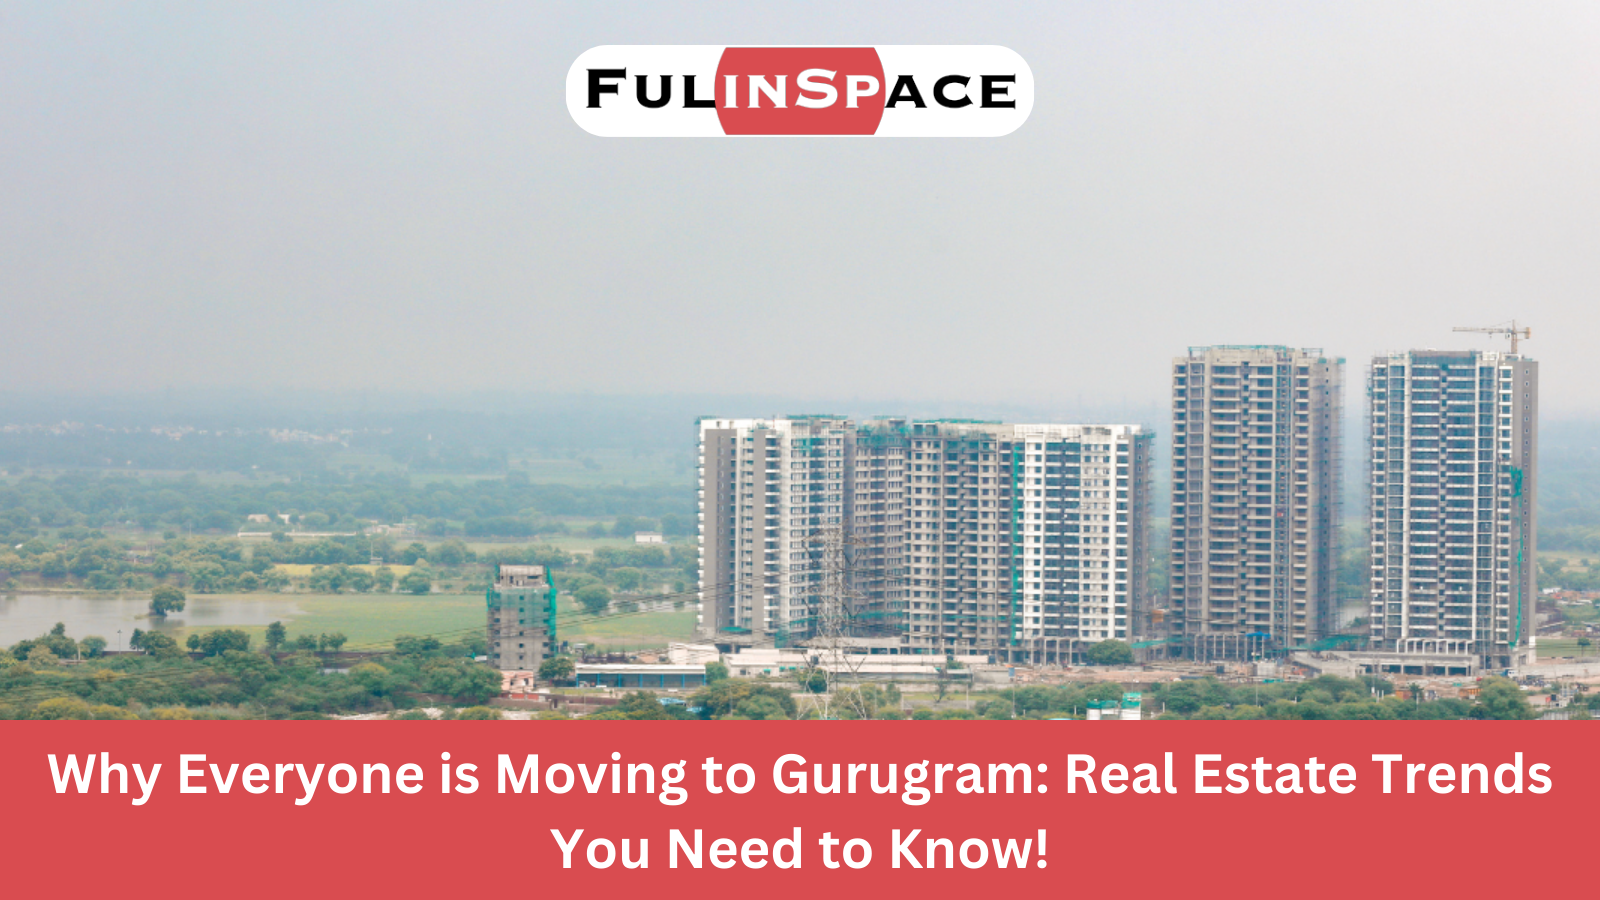 Why Everyone is Moving to Gurugram: Real Estate Trends You Need to Know